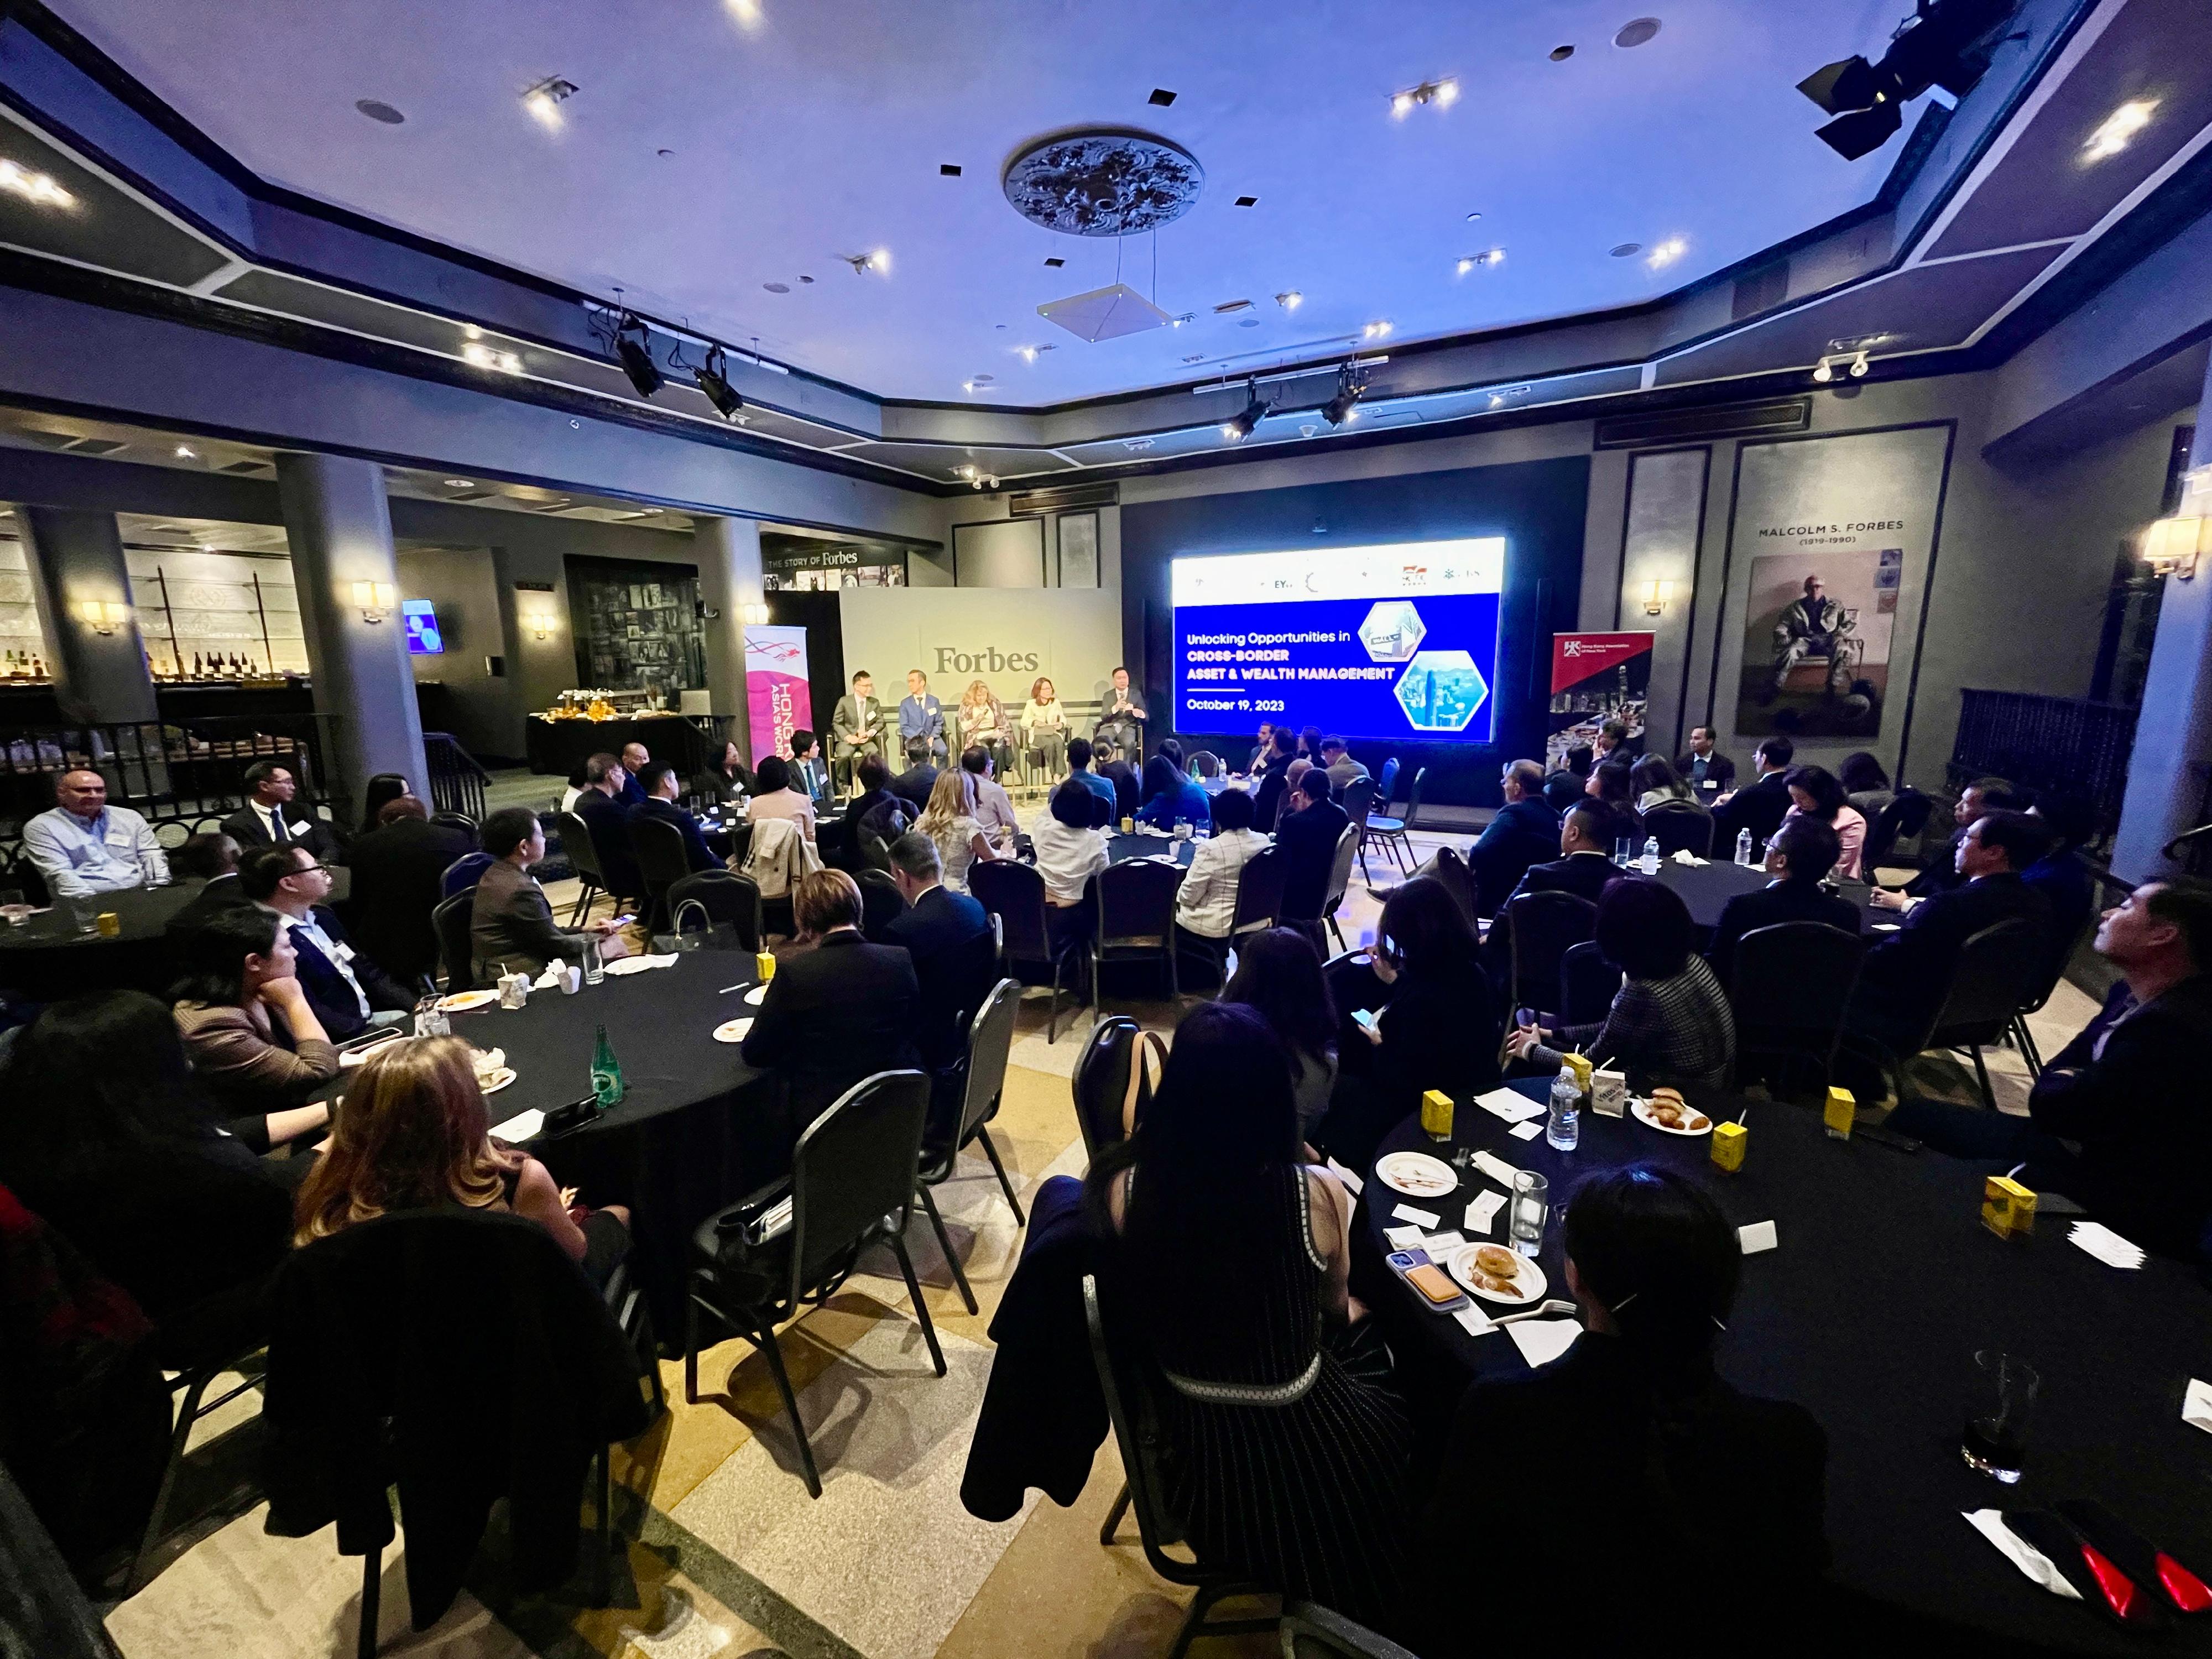 Some 80 enthusiastic financial and business executives in New York gathered on October 19 (New York time) at the seminar on "Unlocking Opportunities in Cross-Border Asset and Wealth Management", co-organised by the Hong Kong Economic and Trade Office in New York and the Hong Kong Association of New York.